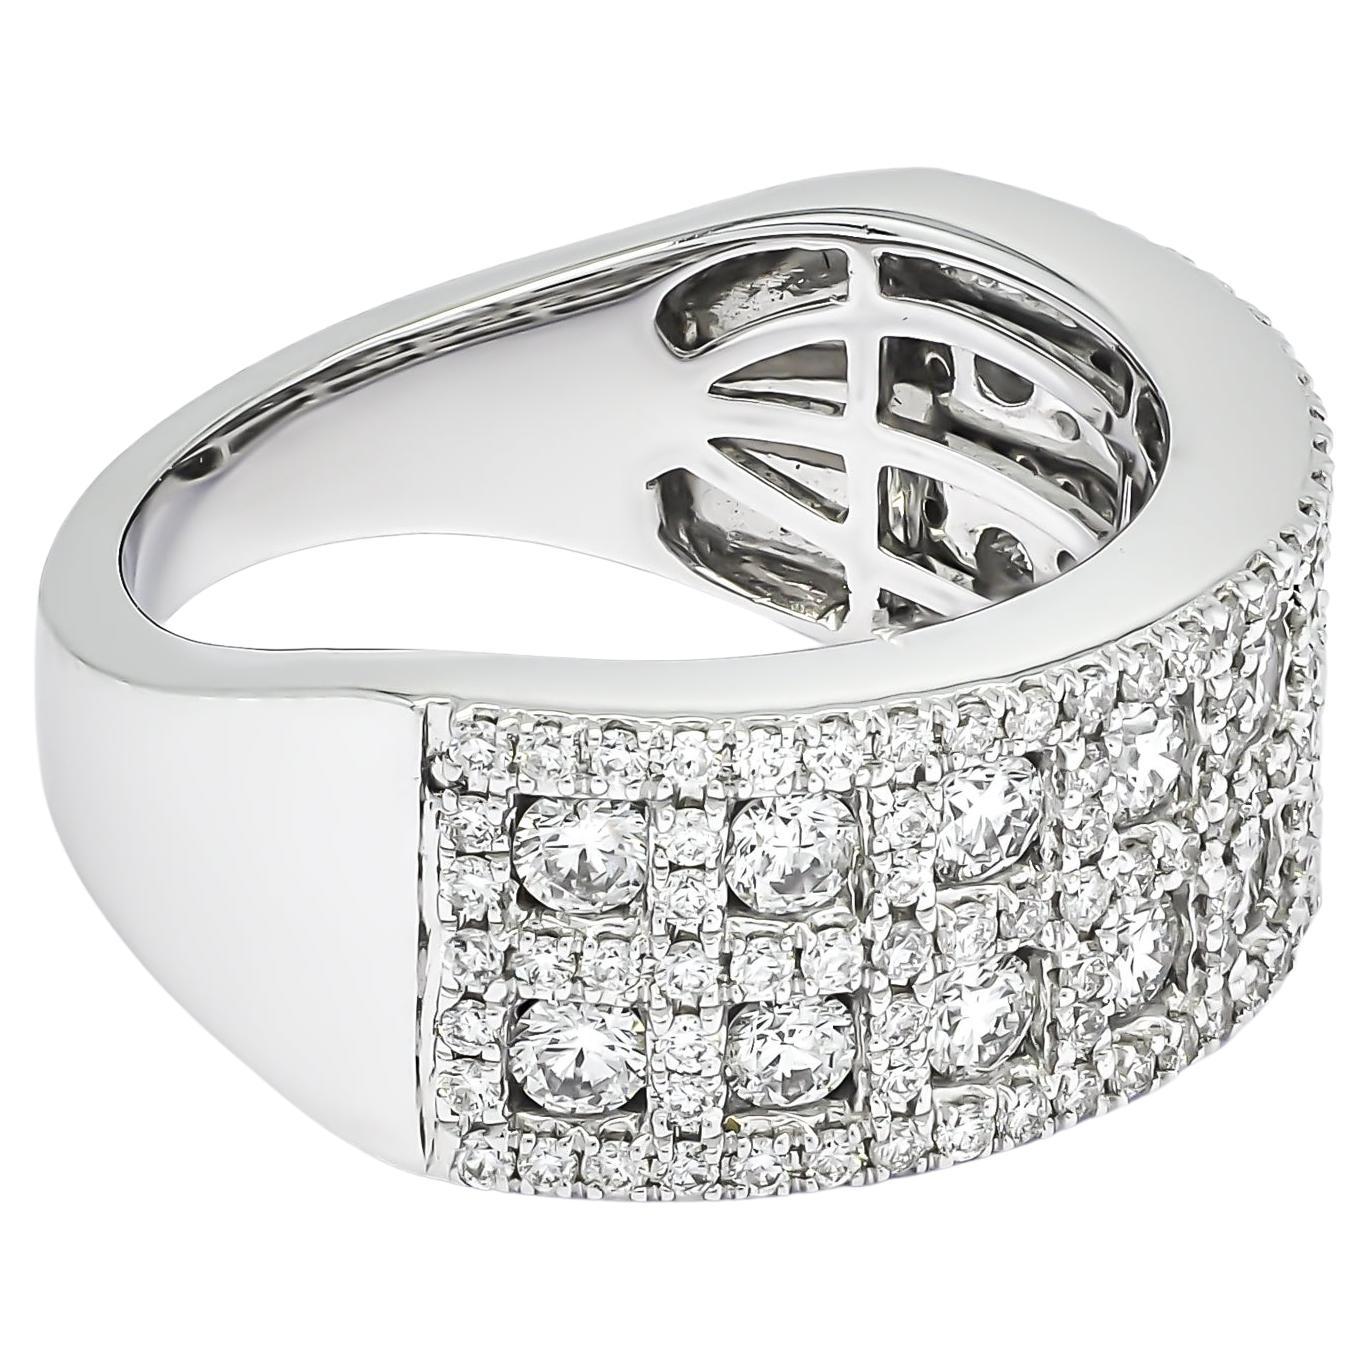 This ring is set in luxurious 18KT white gold with bold multi-row square setting with round Shape natural diamond. Her Heart Will Skip a Beat When She Sees this Handcrafted engraved Diamond Band. 

An Elegant Row of Round Diamonds Gleams Brightly